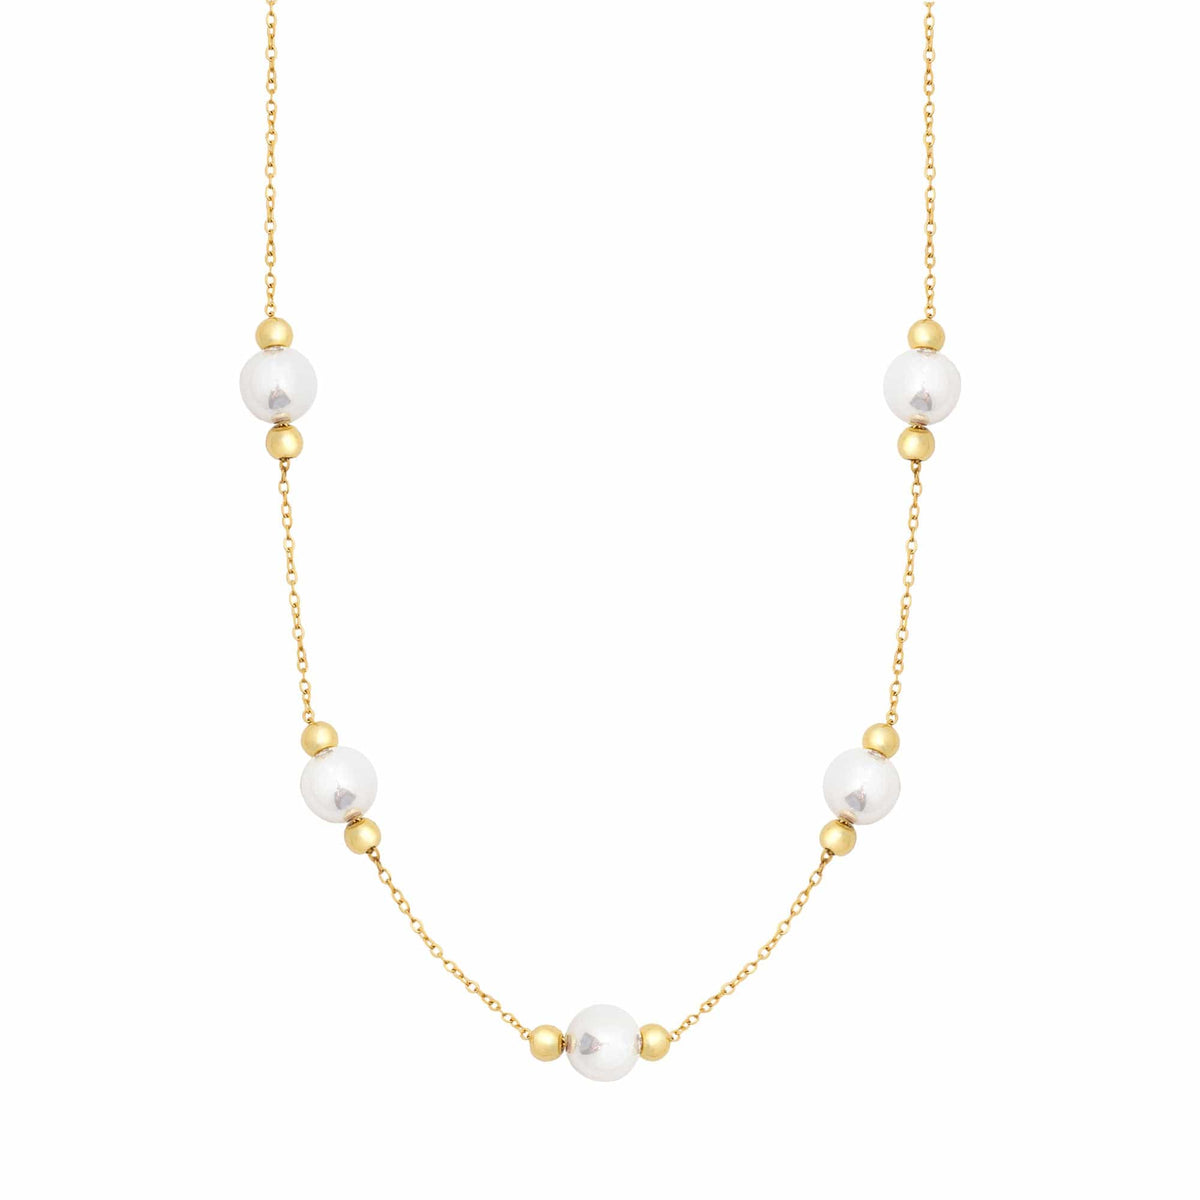 BohoMoon Stainless Steel Exquisite Pearl Necklace Gold